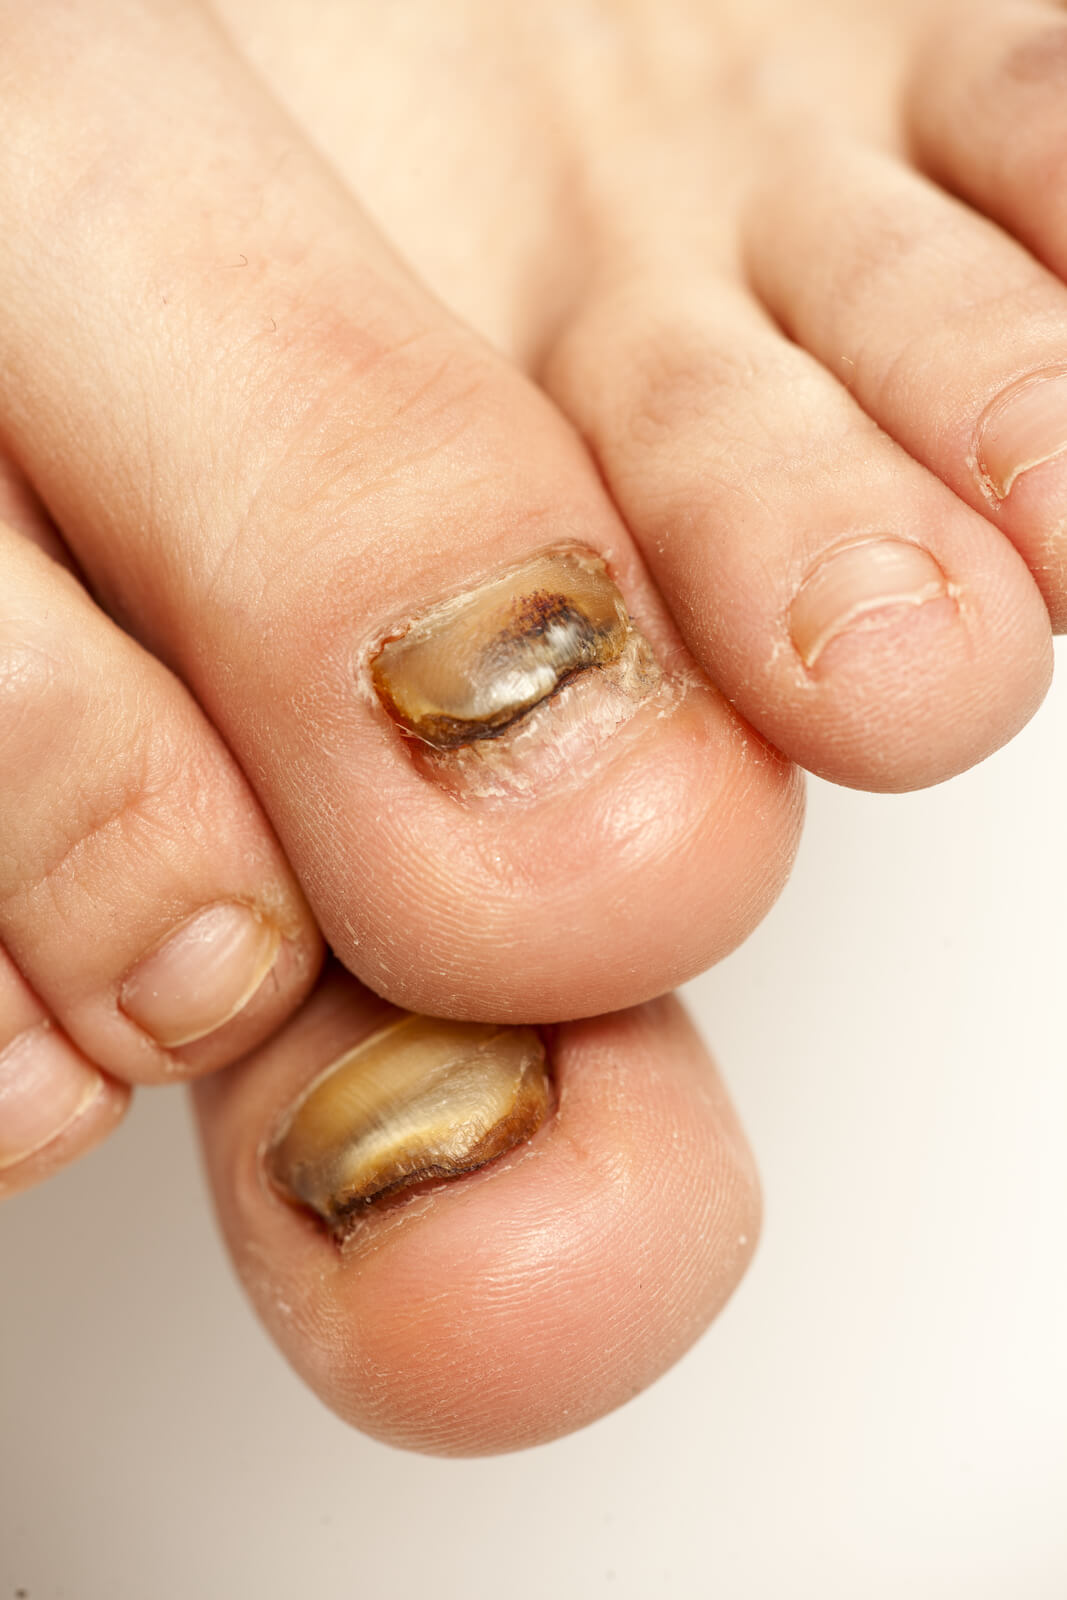 fungal infections of the nails of the feet (toenails) of a young woman.